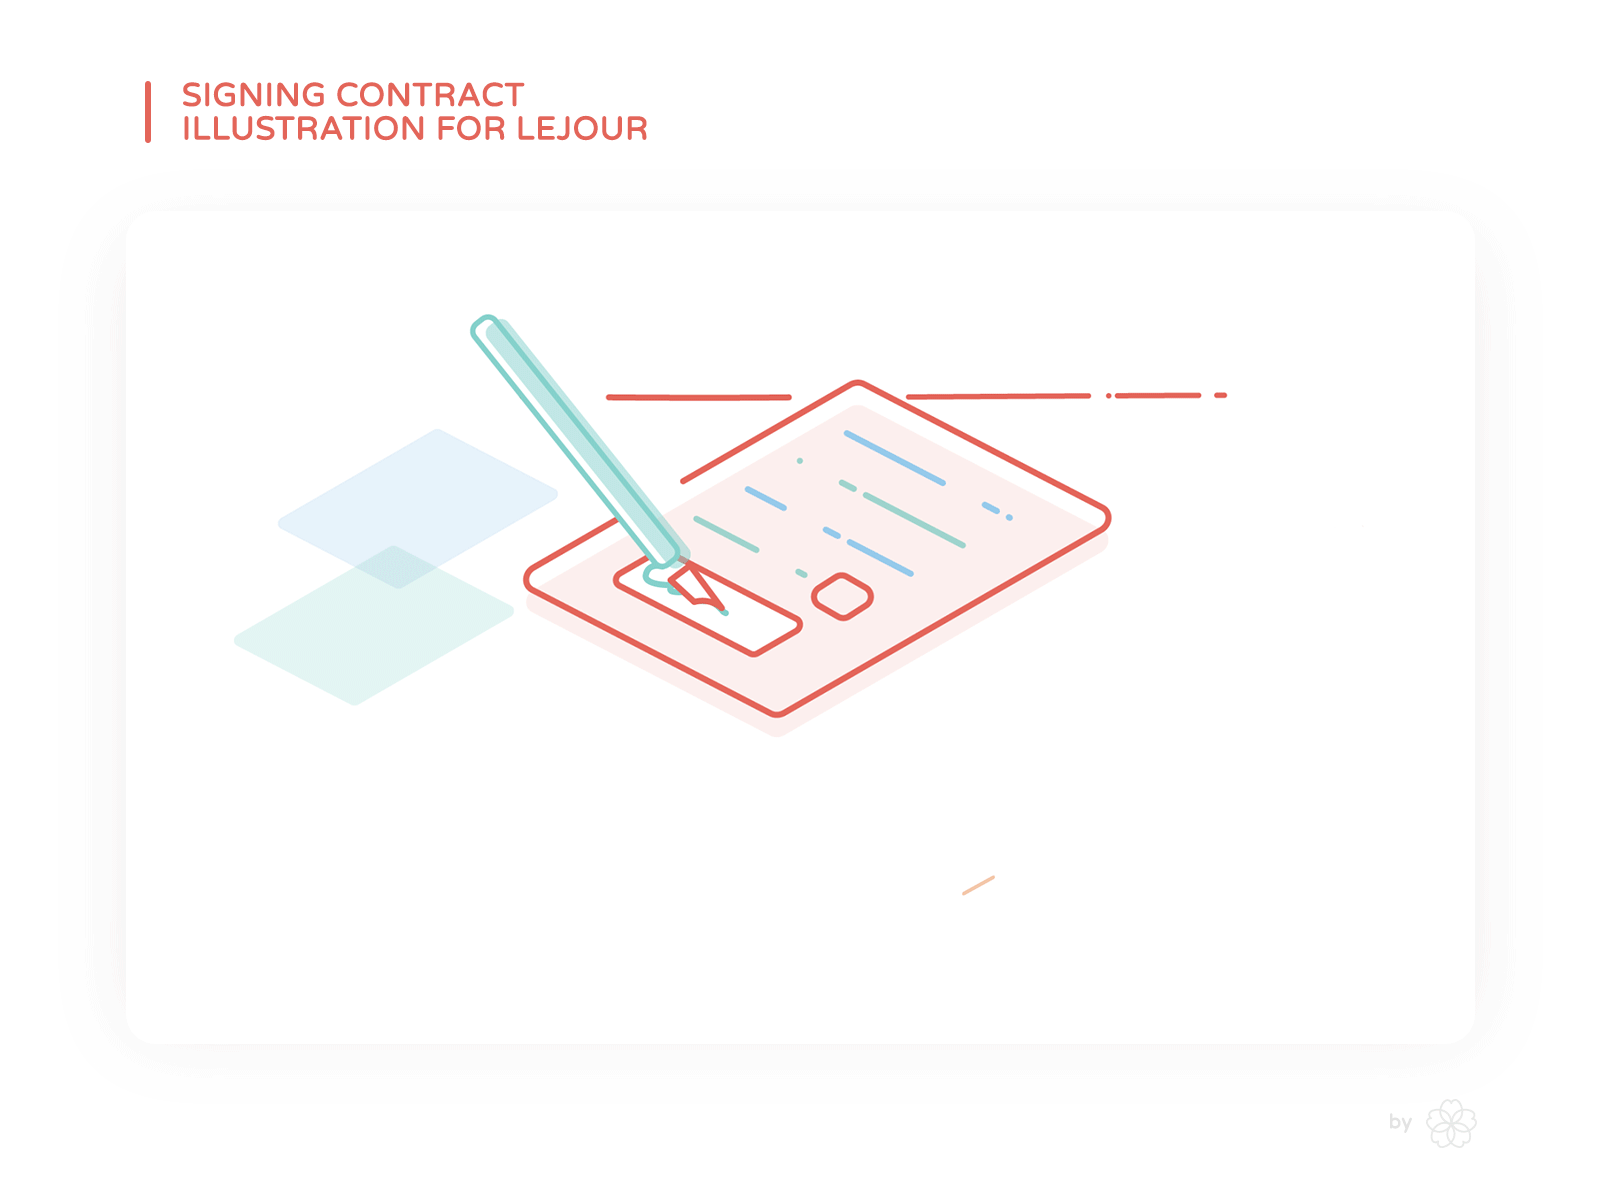 Signing Contract Animation! by Karoline Gammarano on Dribbble